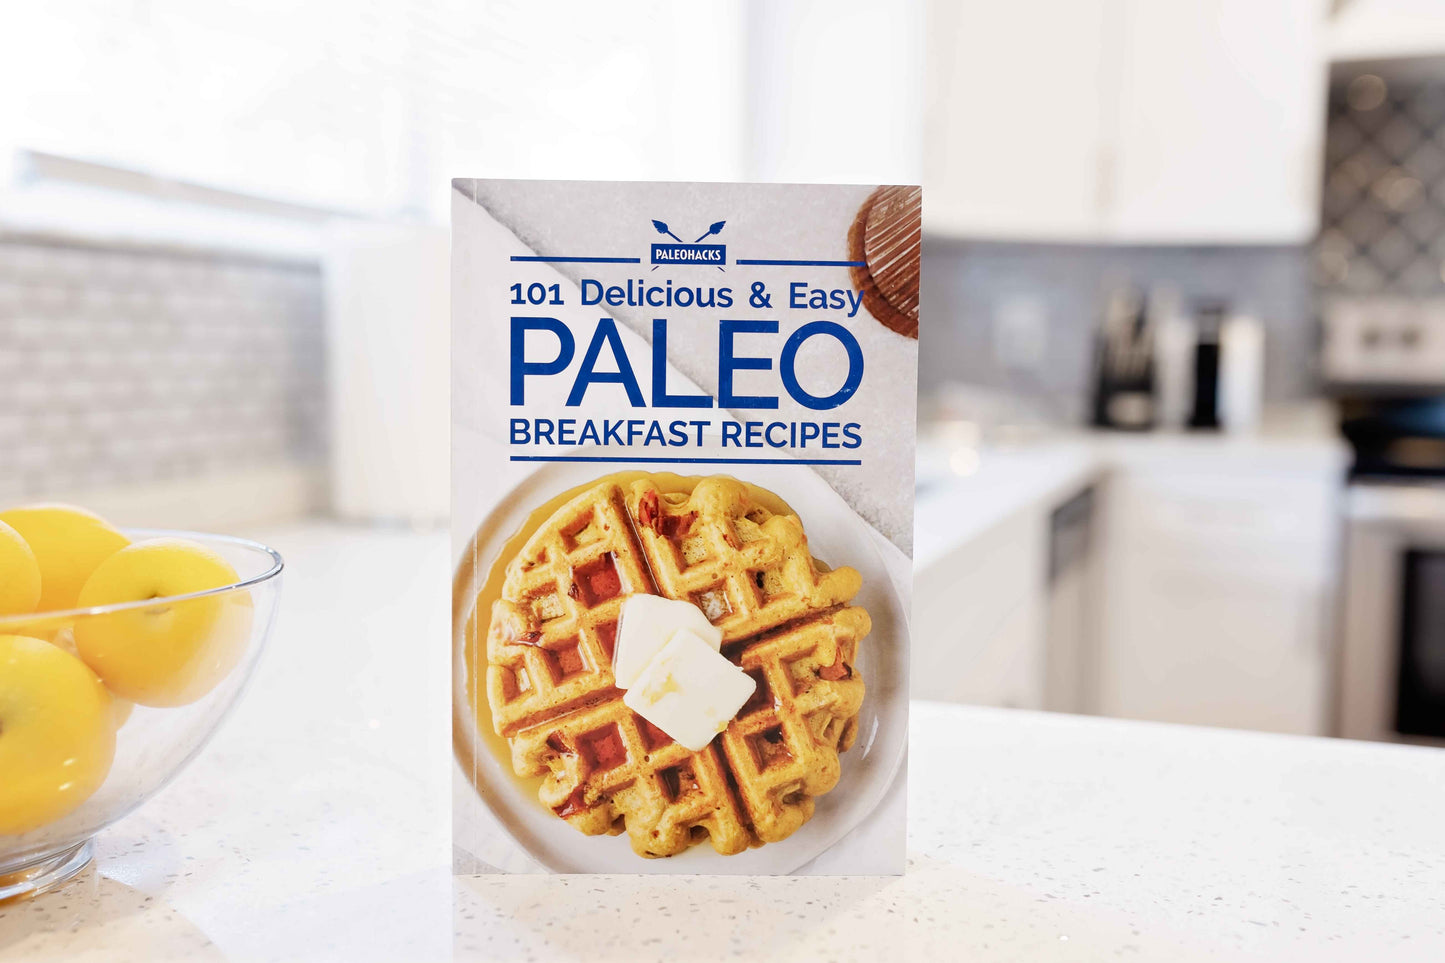 The Paleo Breakfast Cookbook stands on a kitchen counter next to a bowl of lemons.